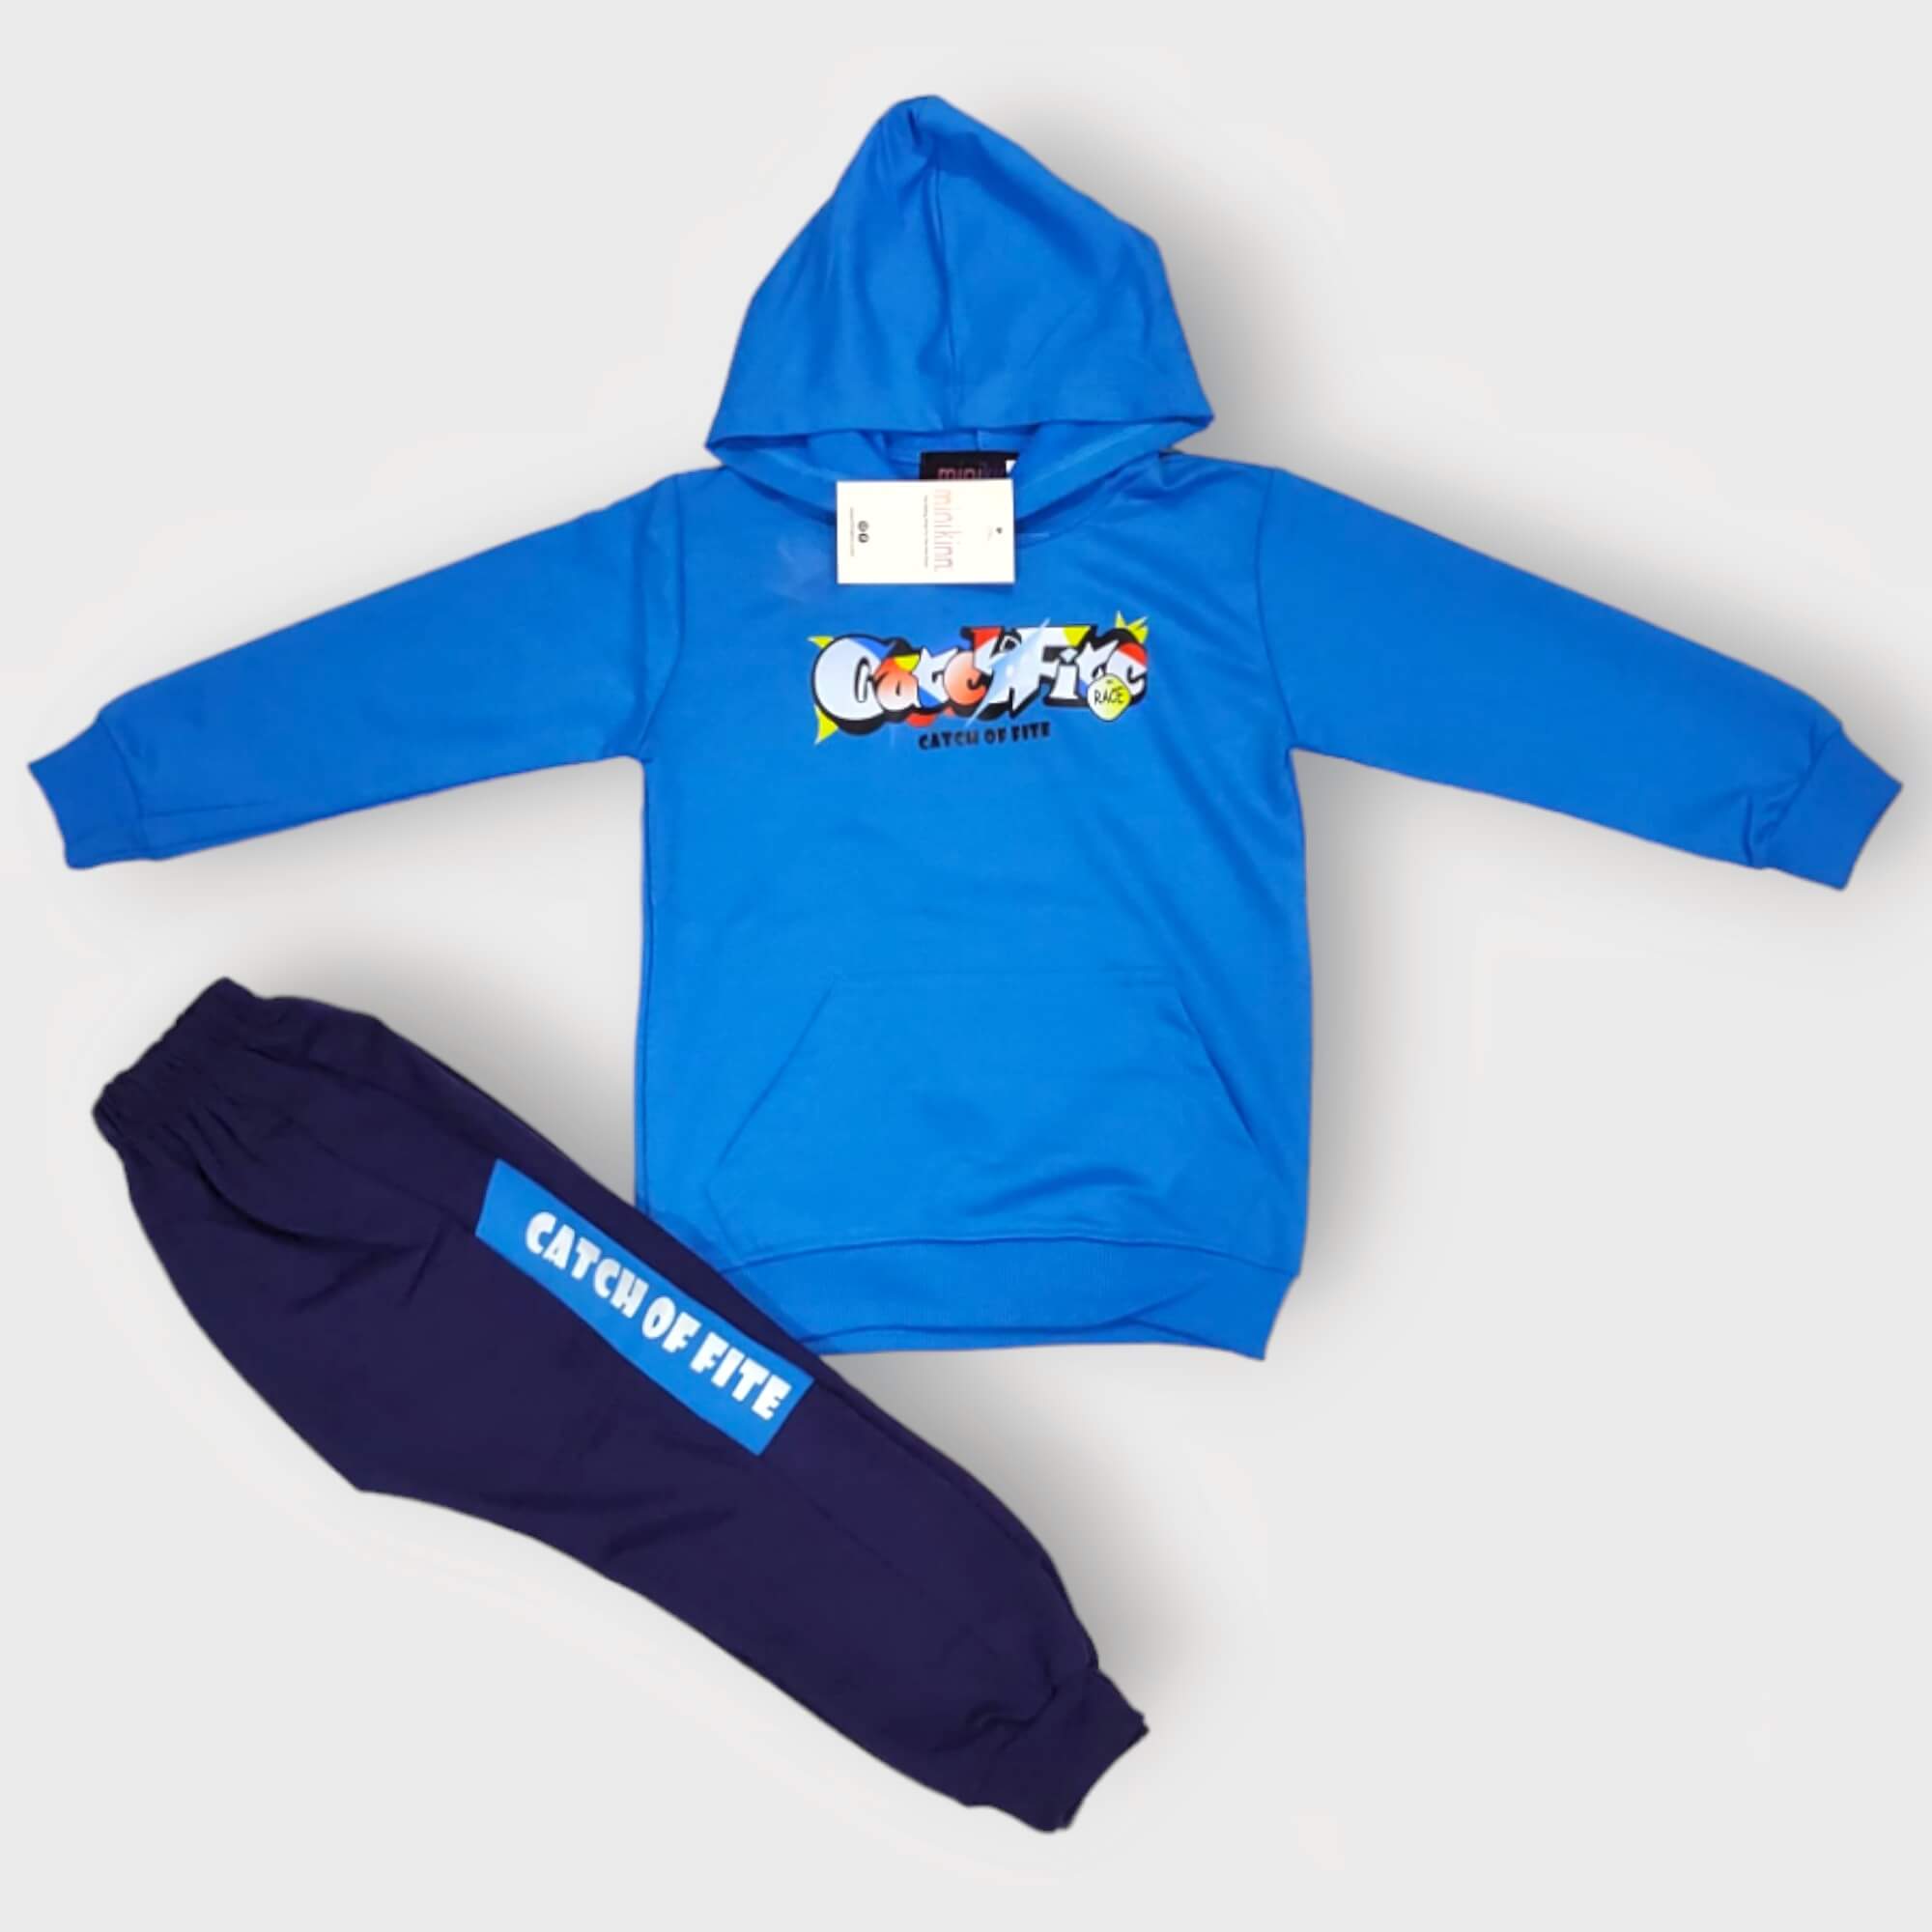 Catch of Fire Printed Royal Blue Boys Hoodie and bottom